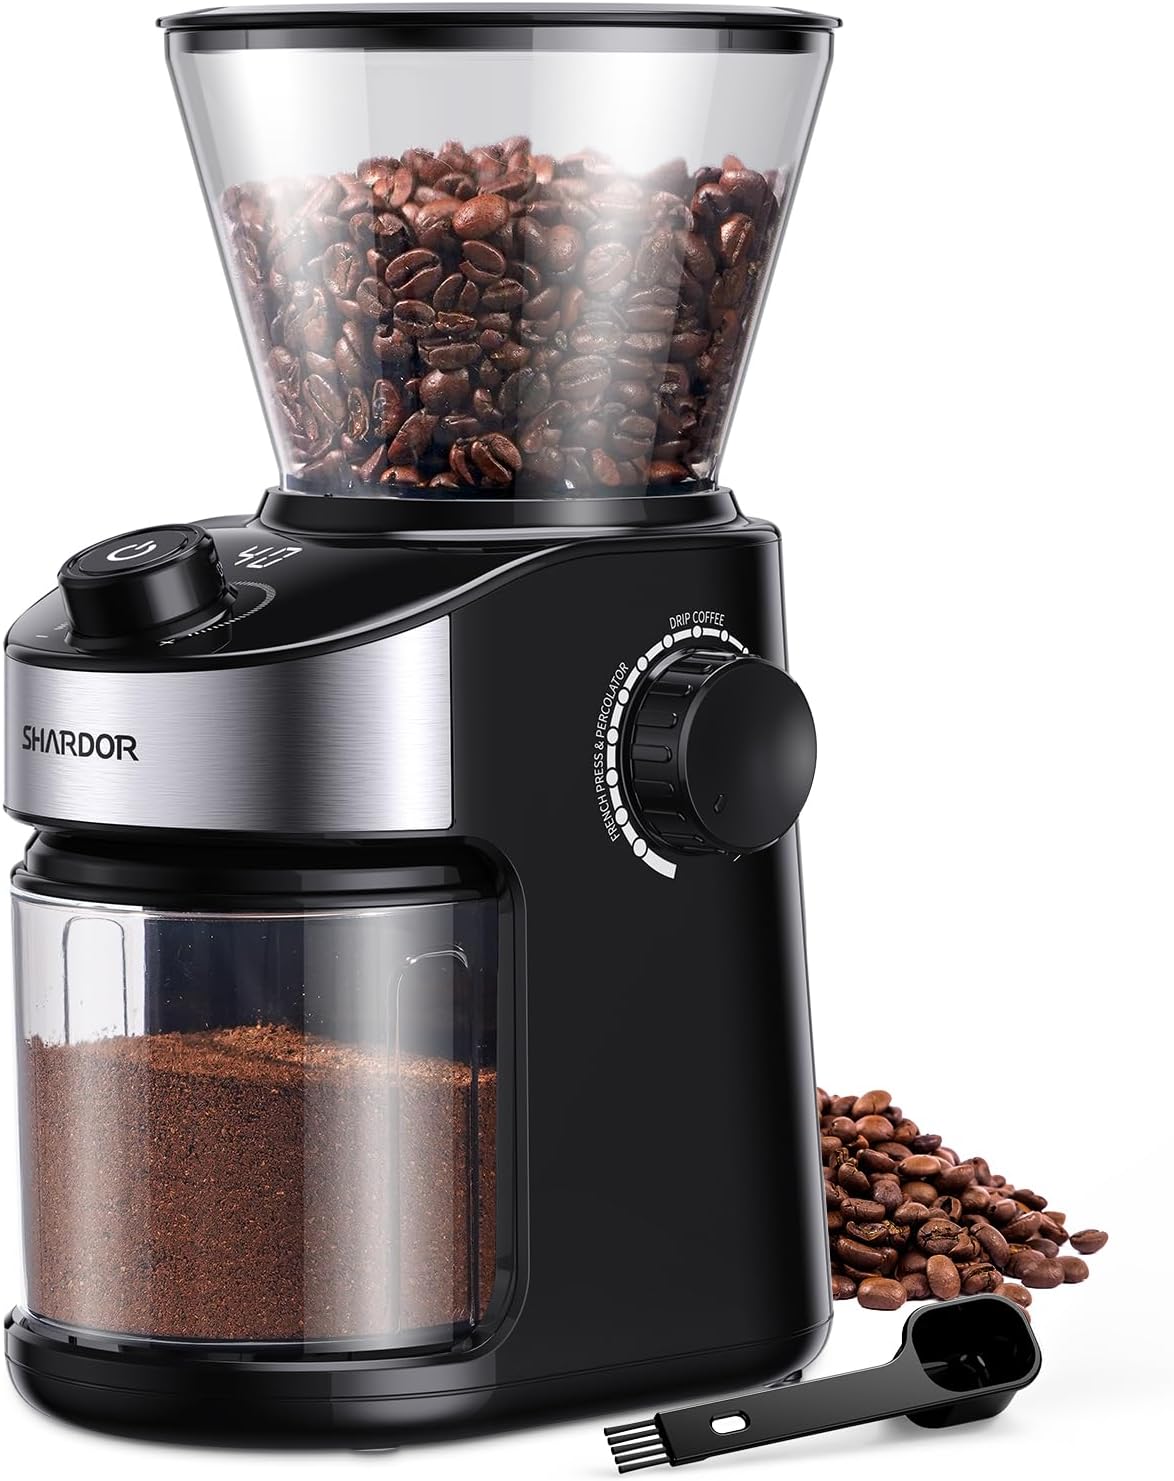 SHARDOR Electric Coffee Grinder with 25 Grinding Settings, Coffee Grinder with Precise Digital Display, Disc Grinder for Espresso, Drip Coffee and French Press, 200 W, 200 g Bean Container